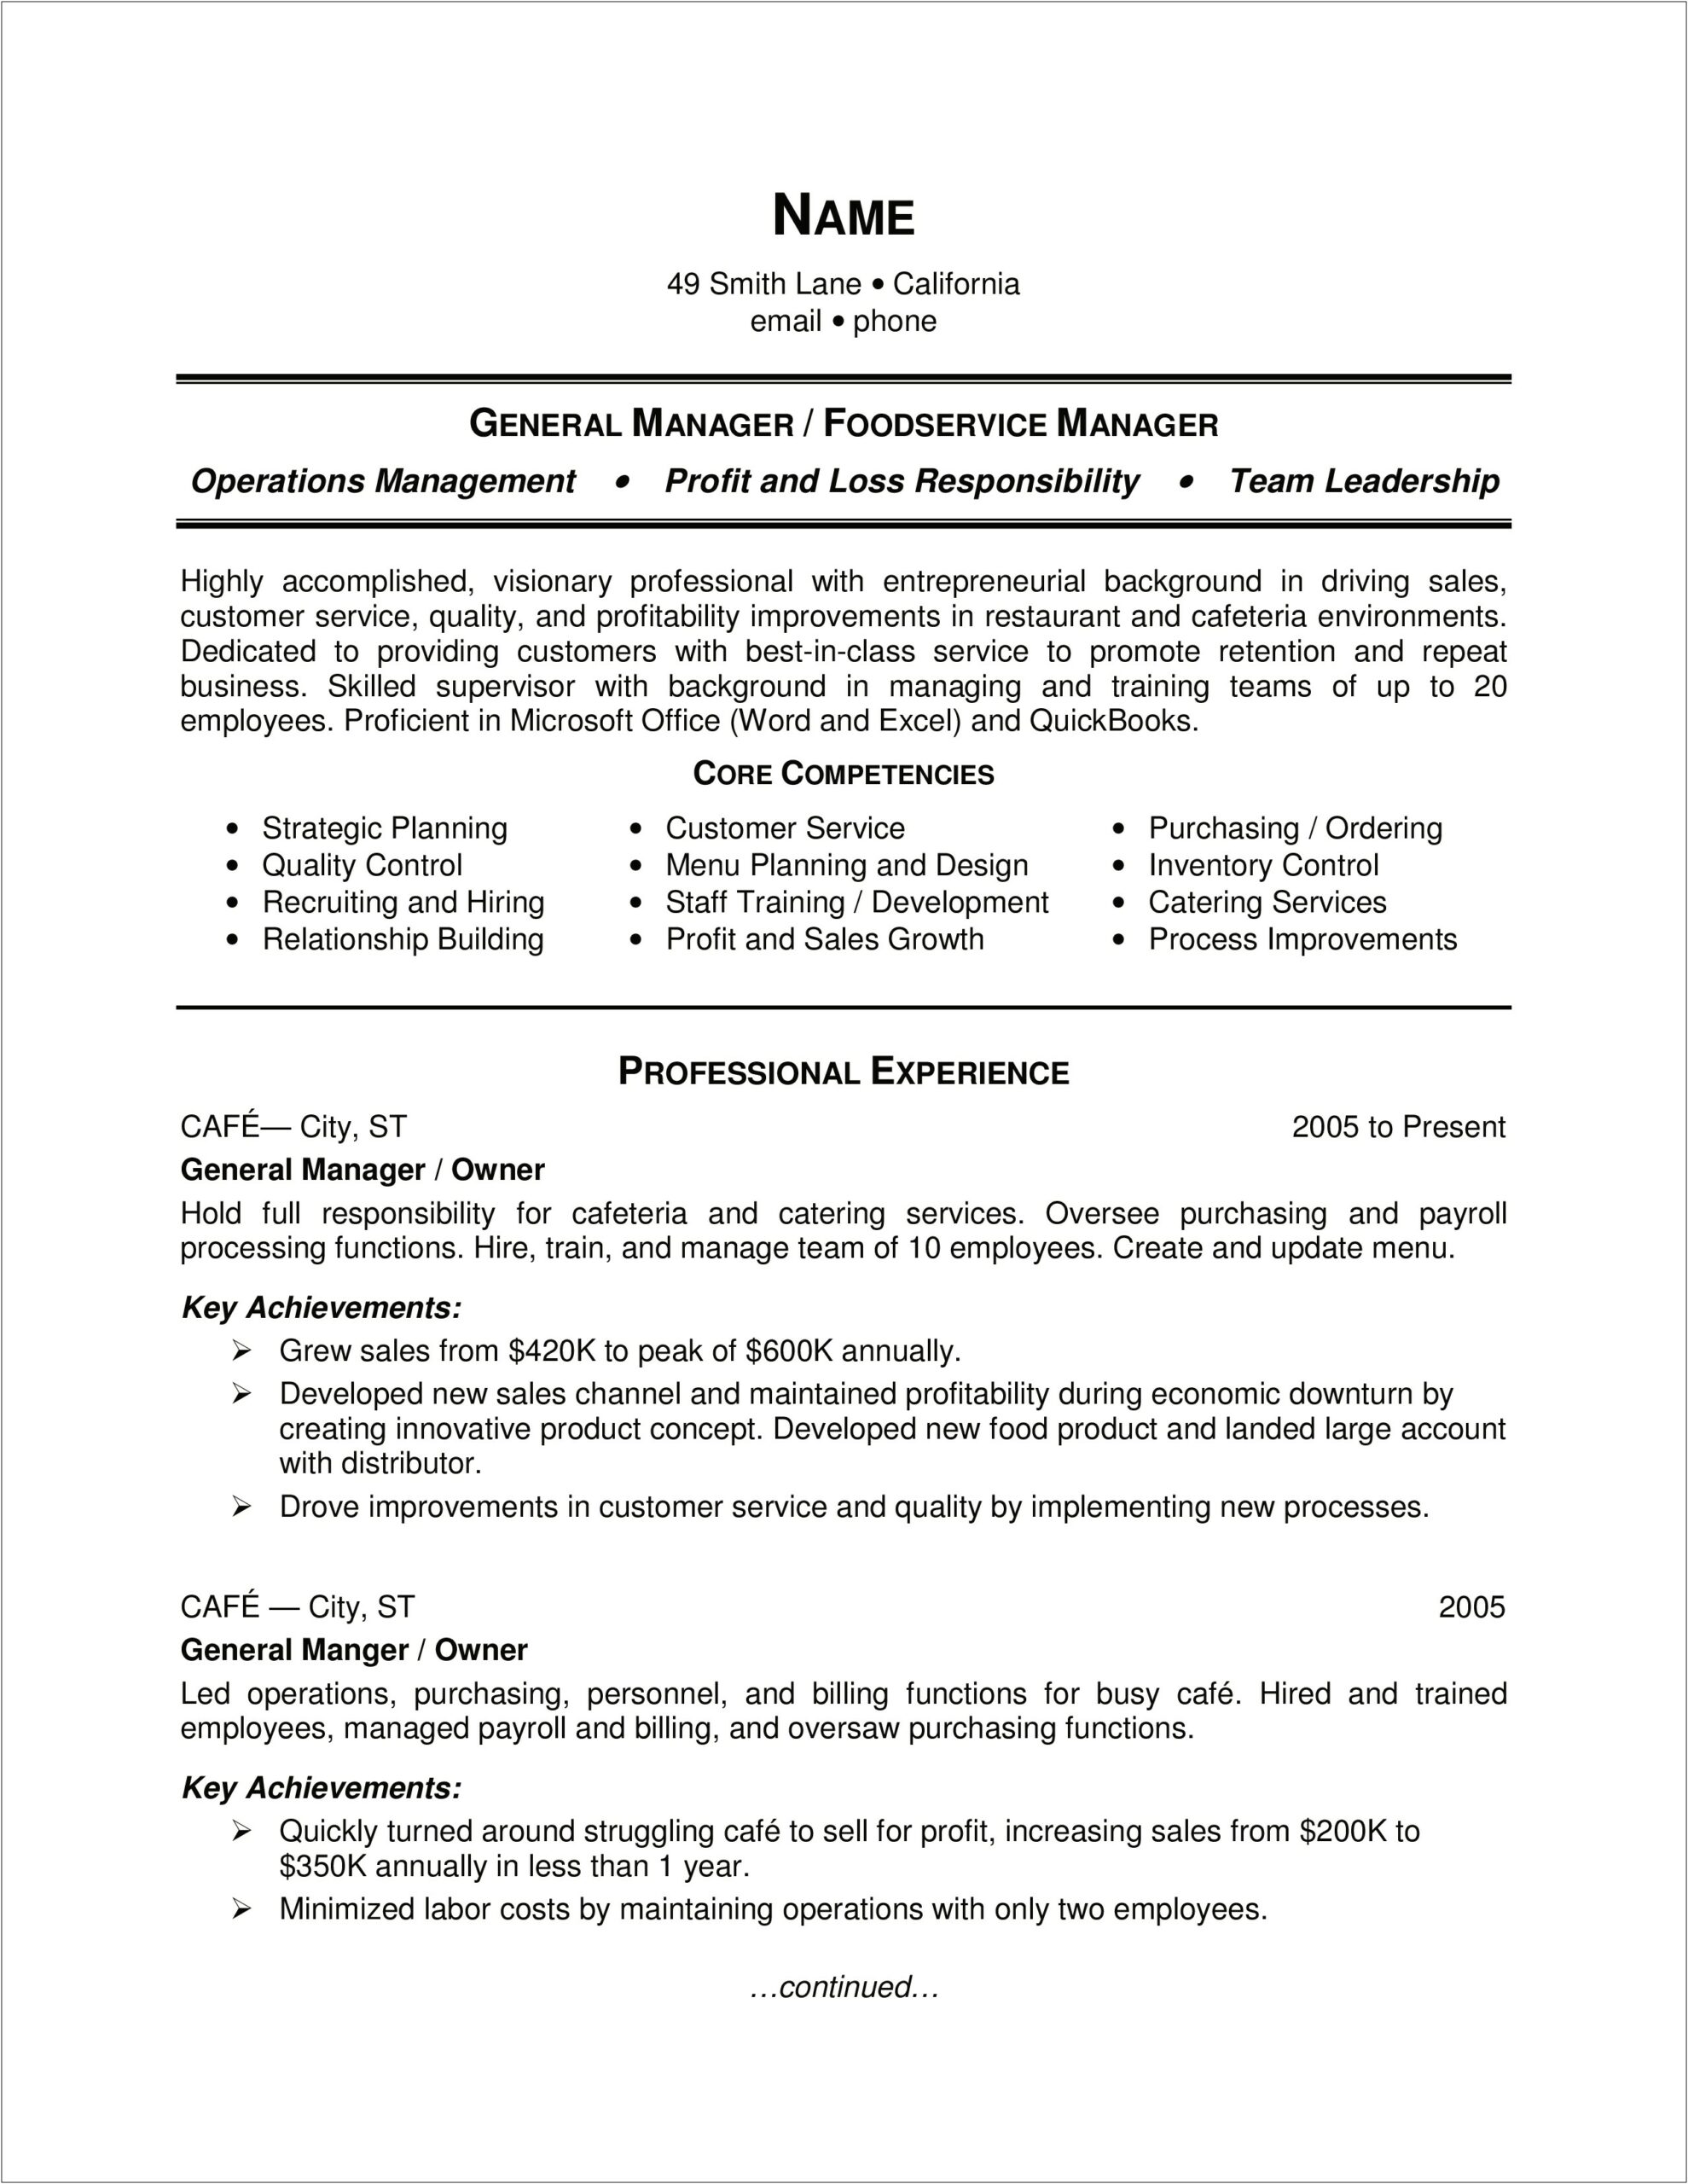 Resume Templates Food Service Manager